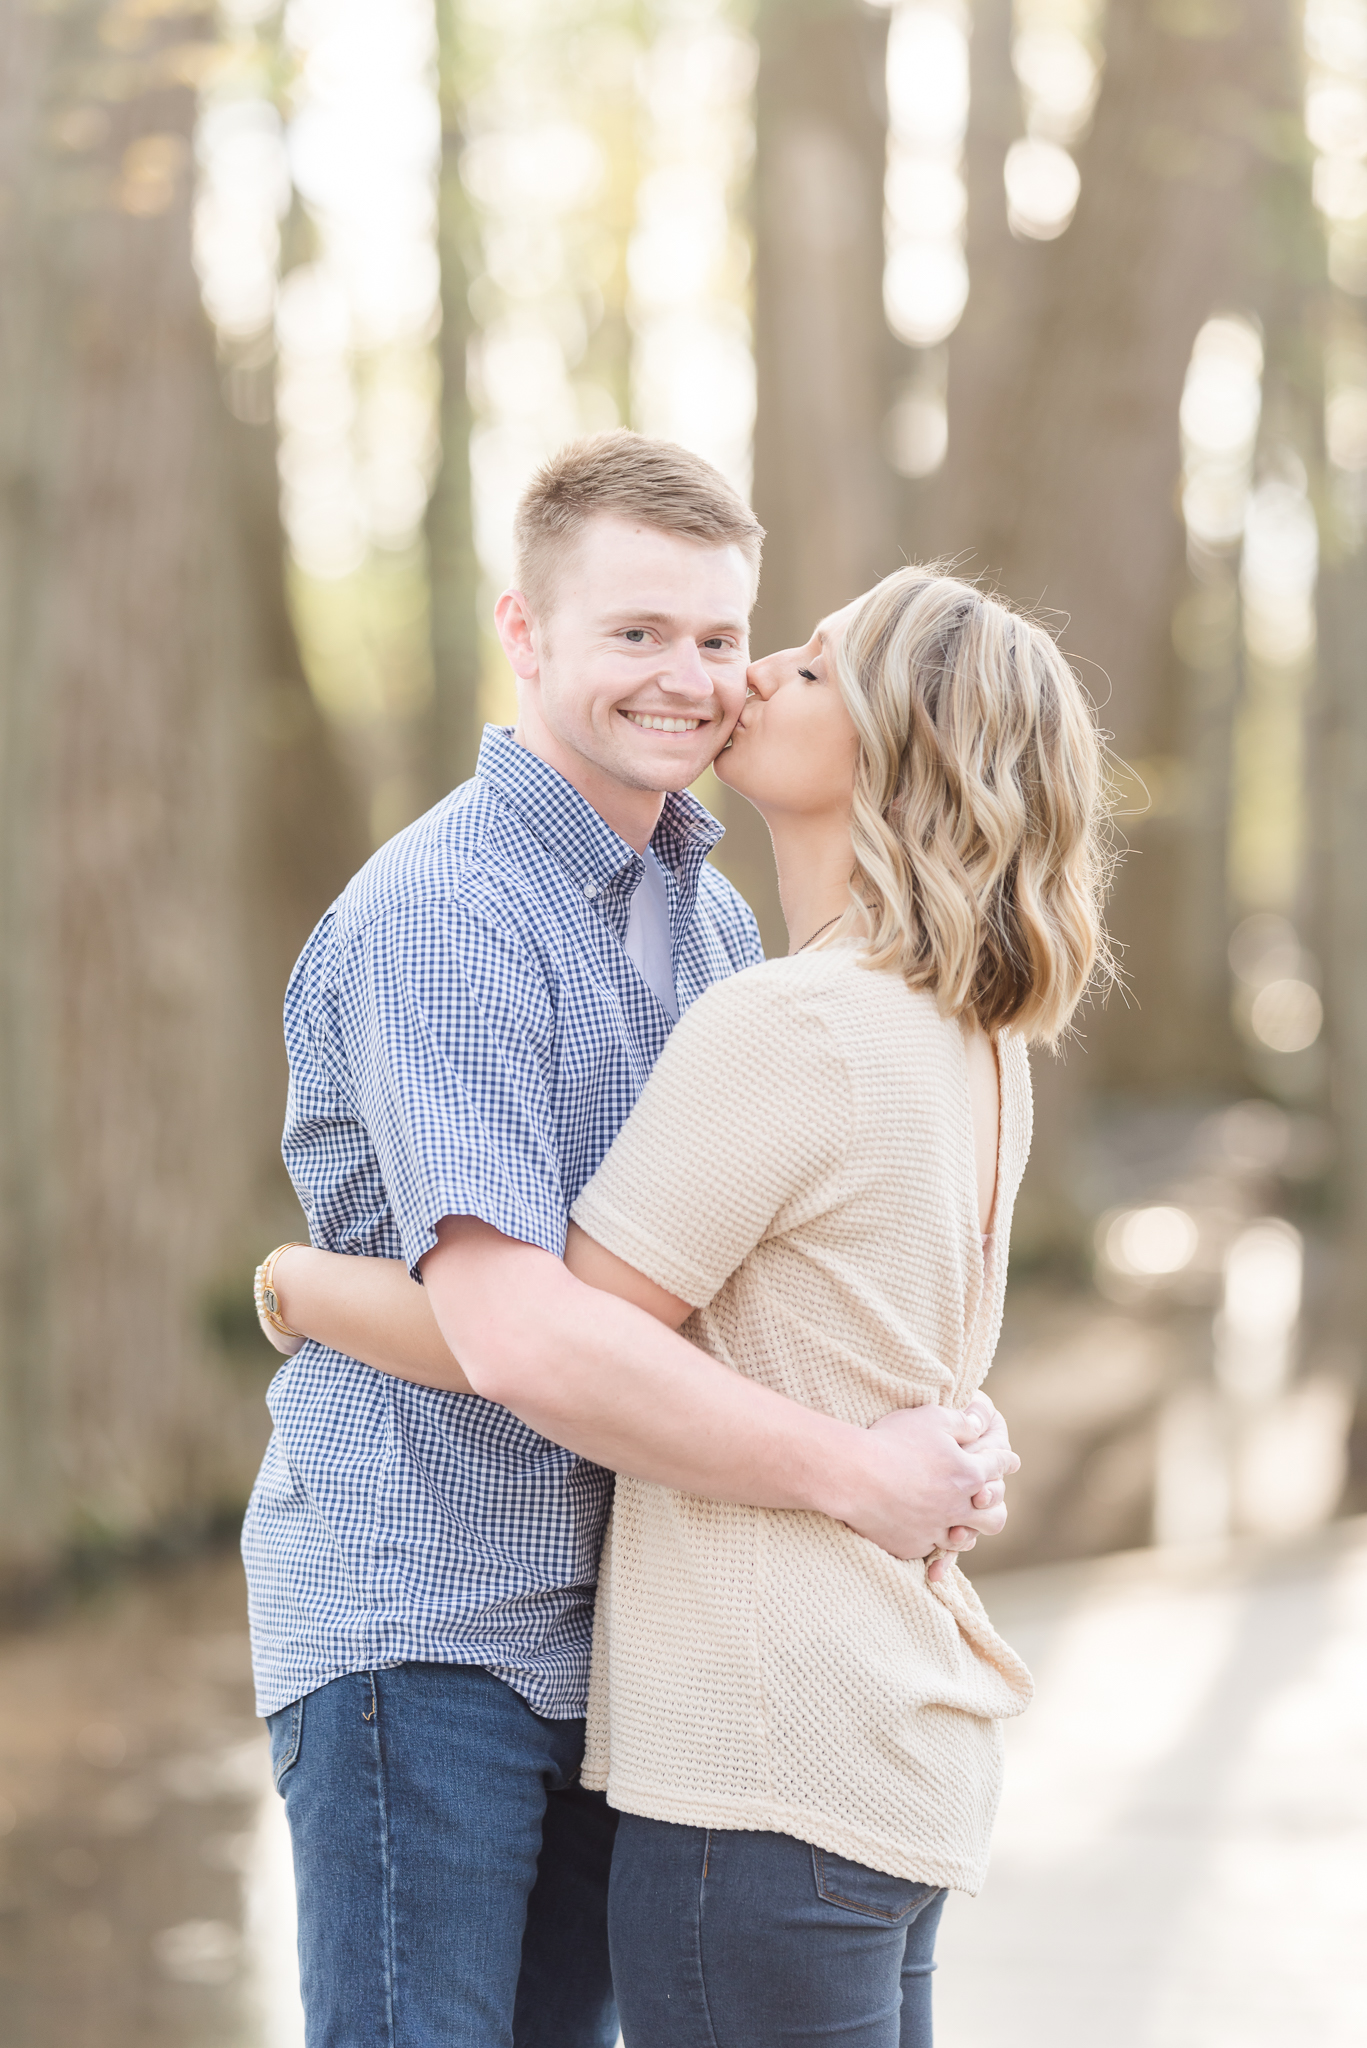 Richie Woods Nature Preserve and Mustard Seed Gardens Engagement Session Wedding Photos-15.jpg